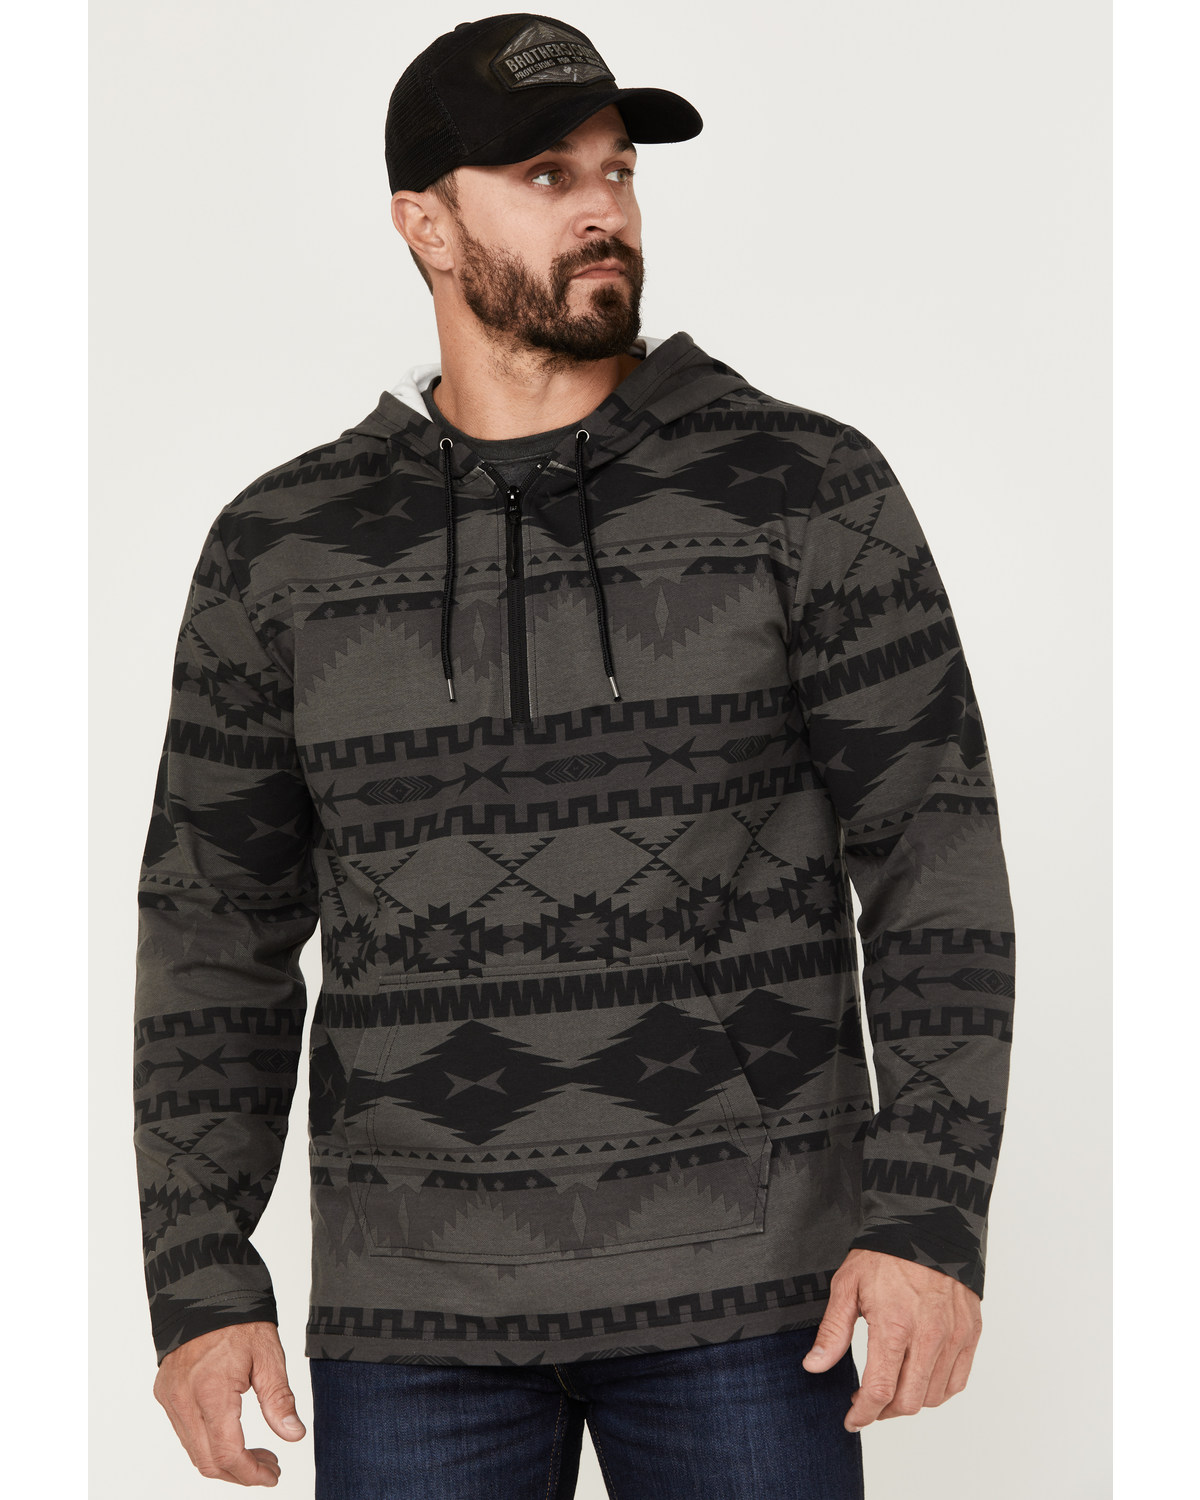 Powder River Outfitters Men's 1/4 Zip Southwestern Print Hooded Pullover